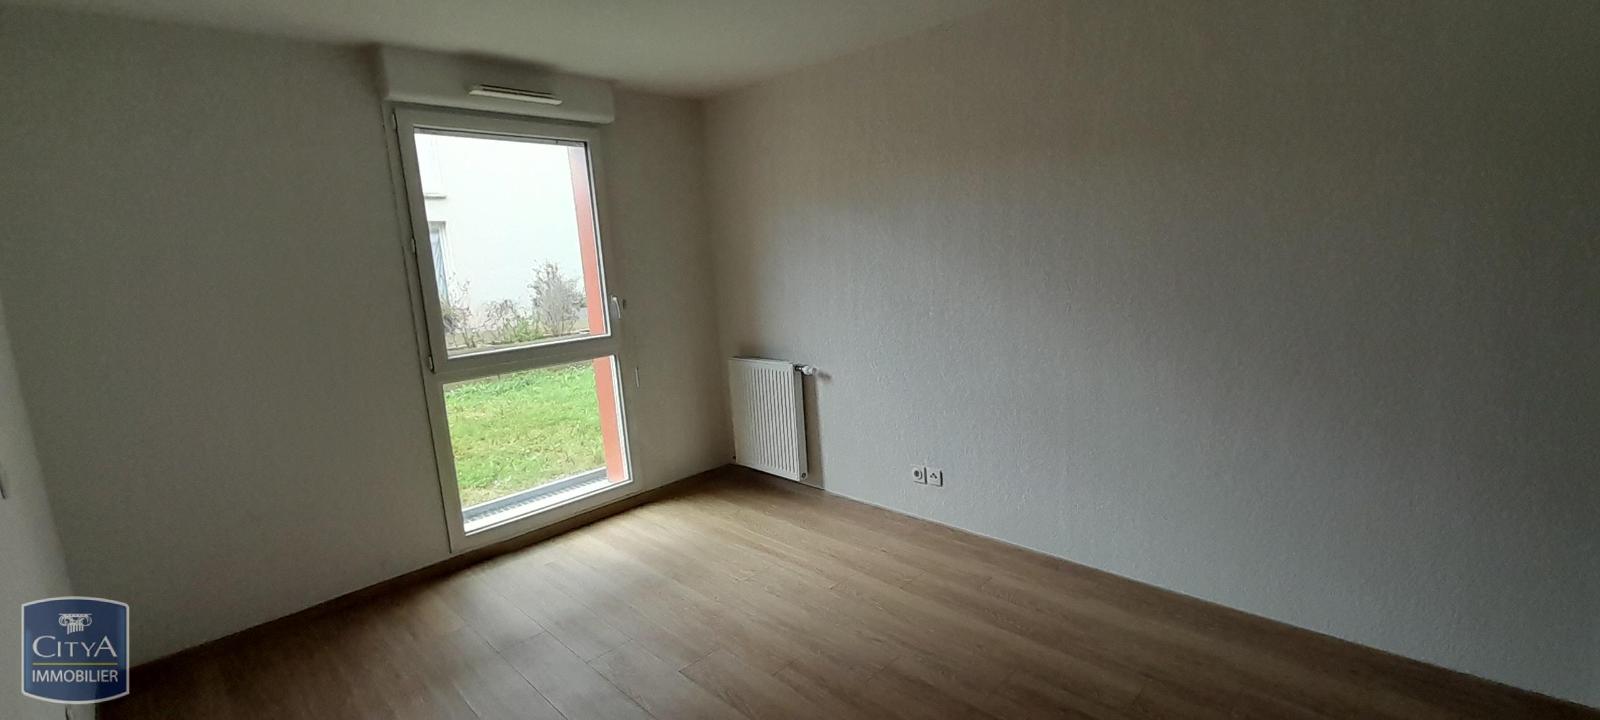 Photo 4 appartement Tournefeuille